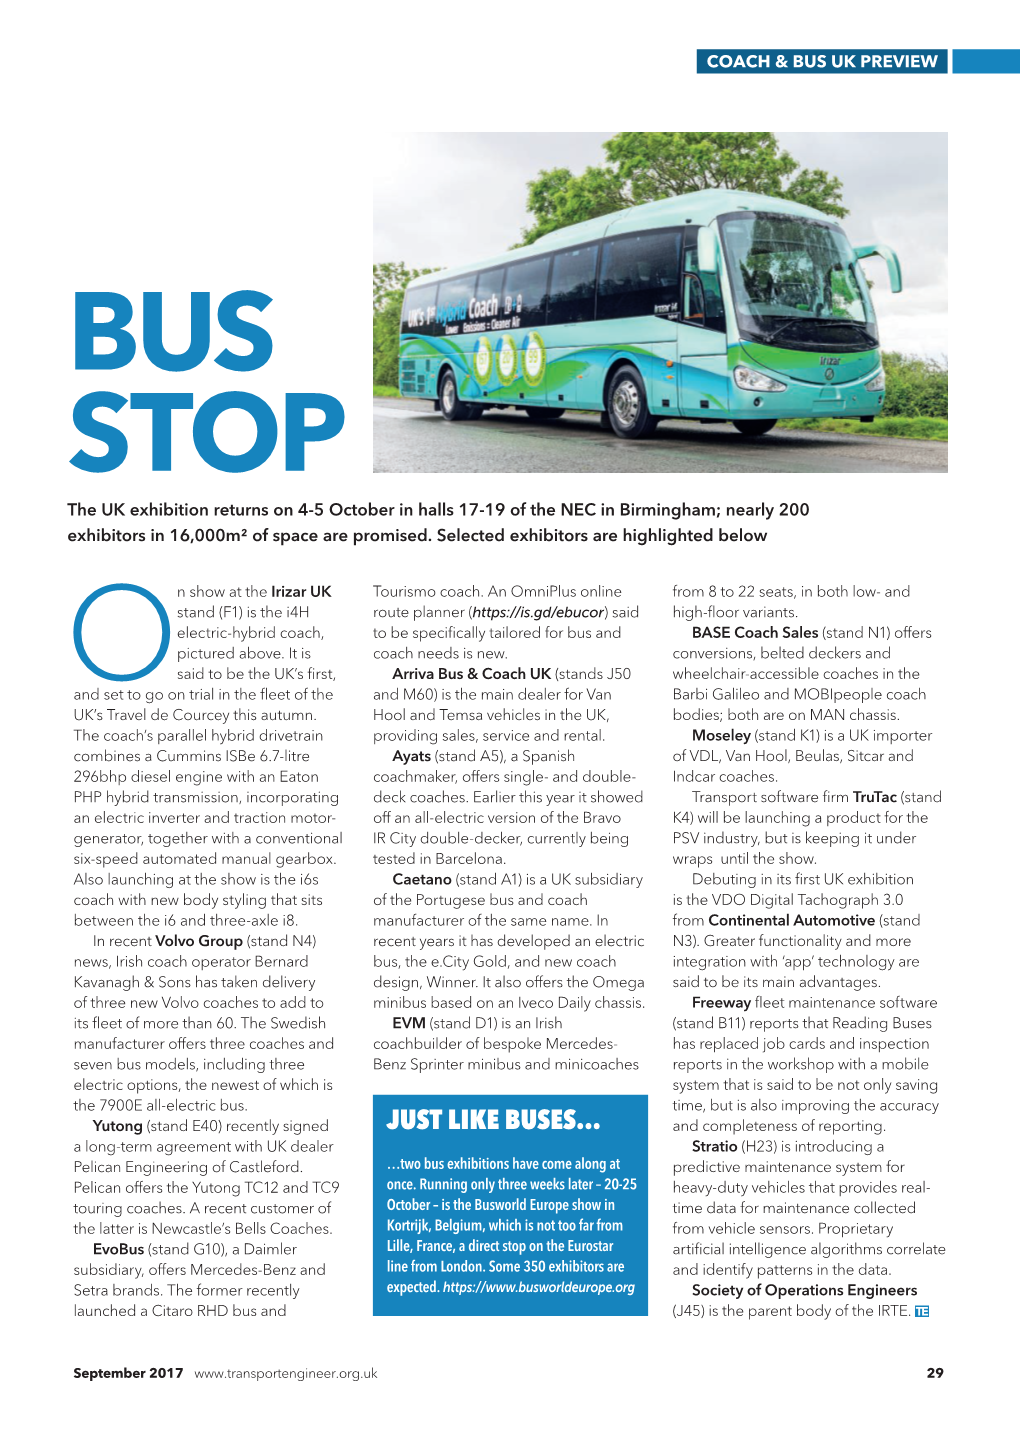 BUS STOP the UK Exhibition Returns on 4-5 October in Halls 17-19 of the NEC in Birmingham; Nearly 200 Exhibitors in 16,000M² of Space Are Promised